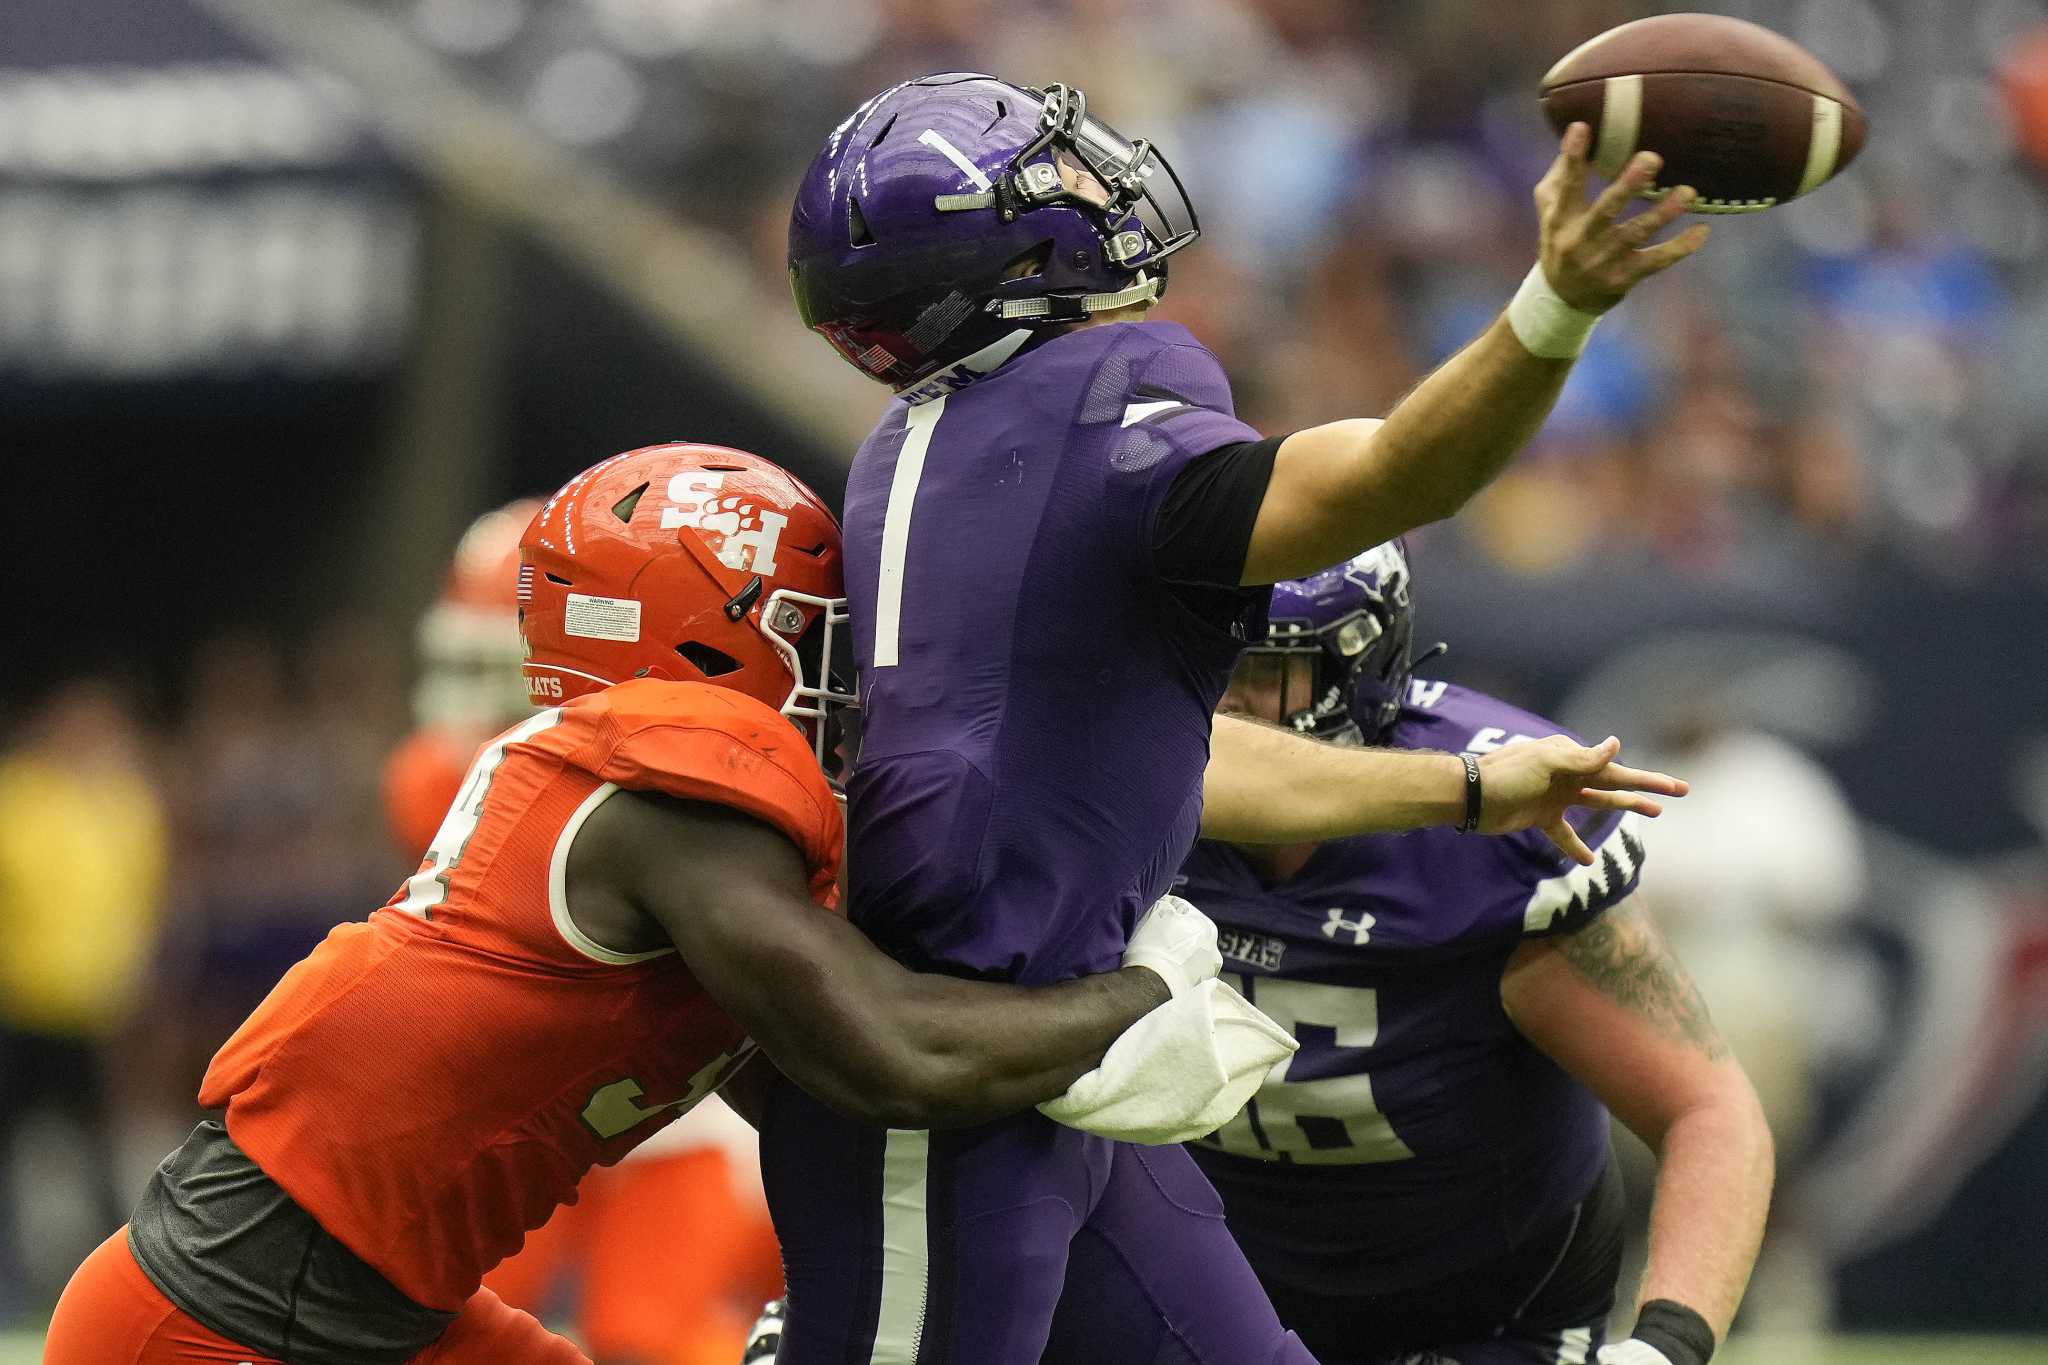 SFA ends disappointing season with loss to Sam Houston State